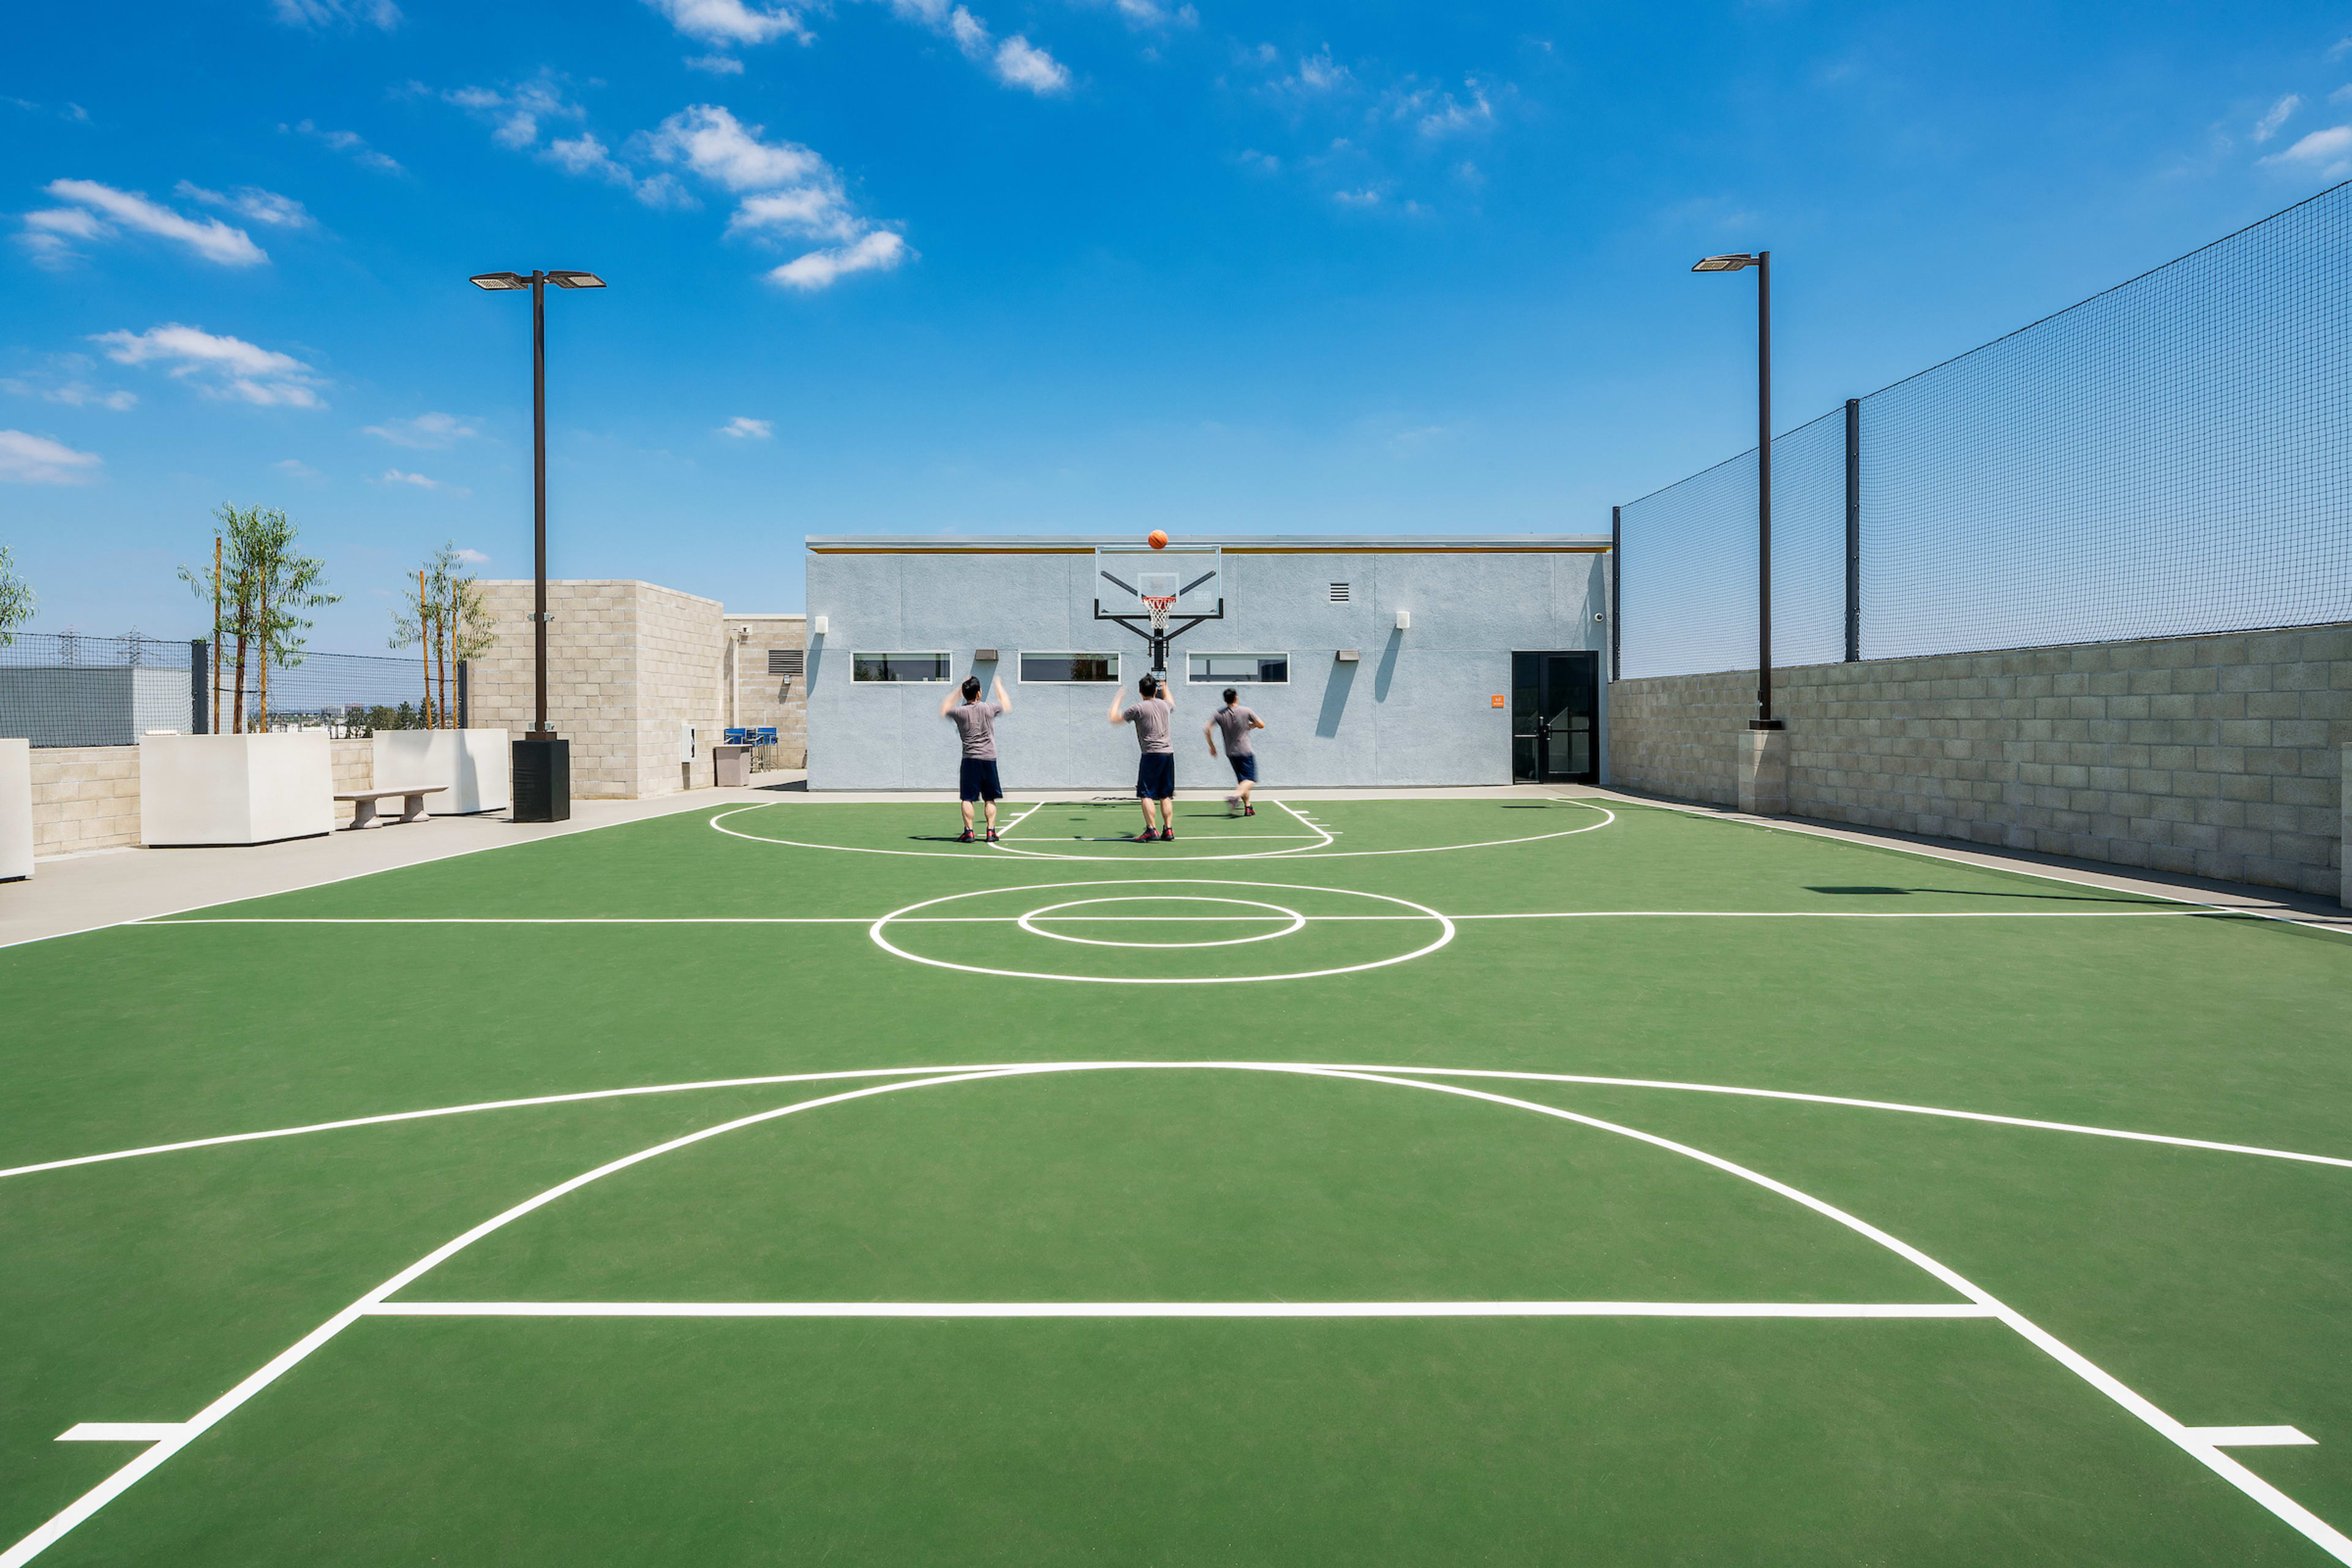 BASKETBALL COURT HIRE  Rent this location on Giggster